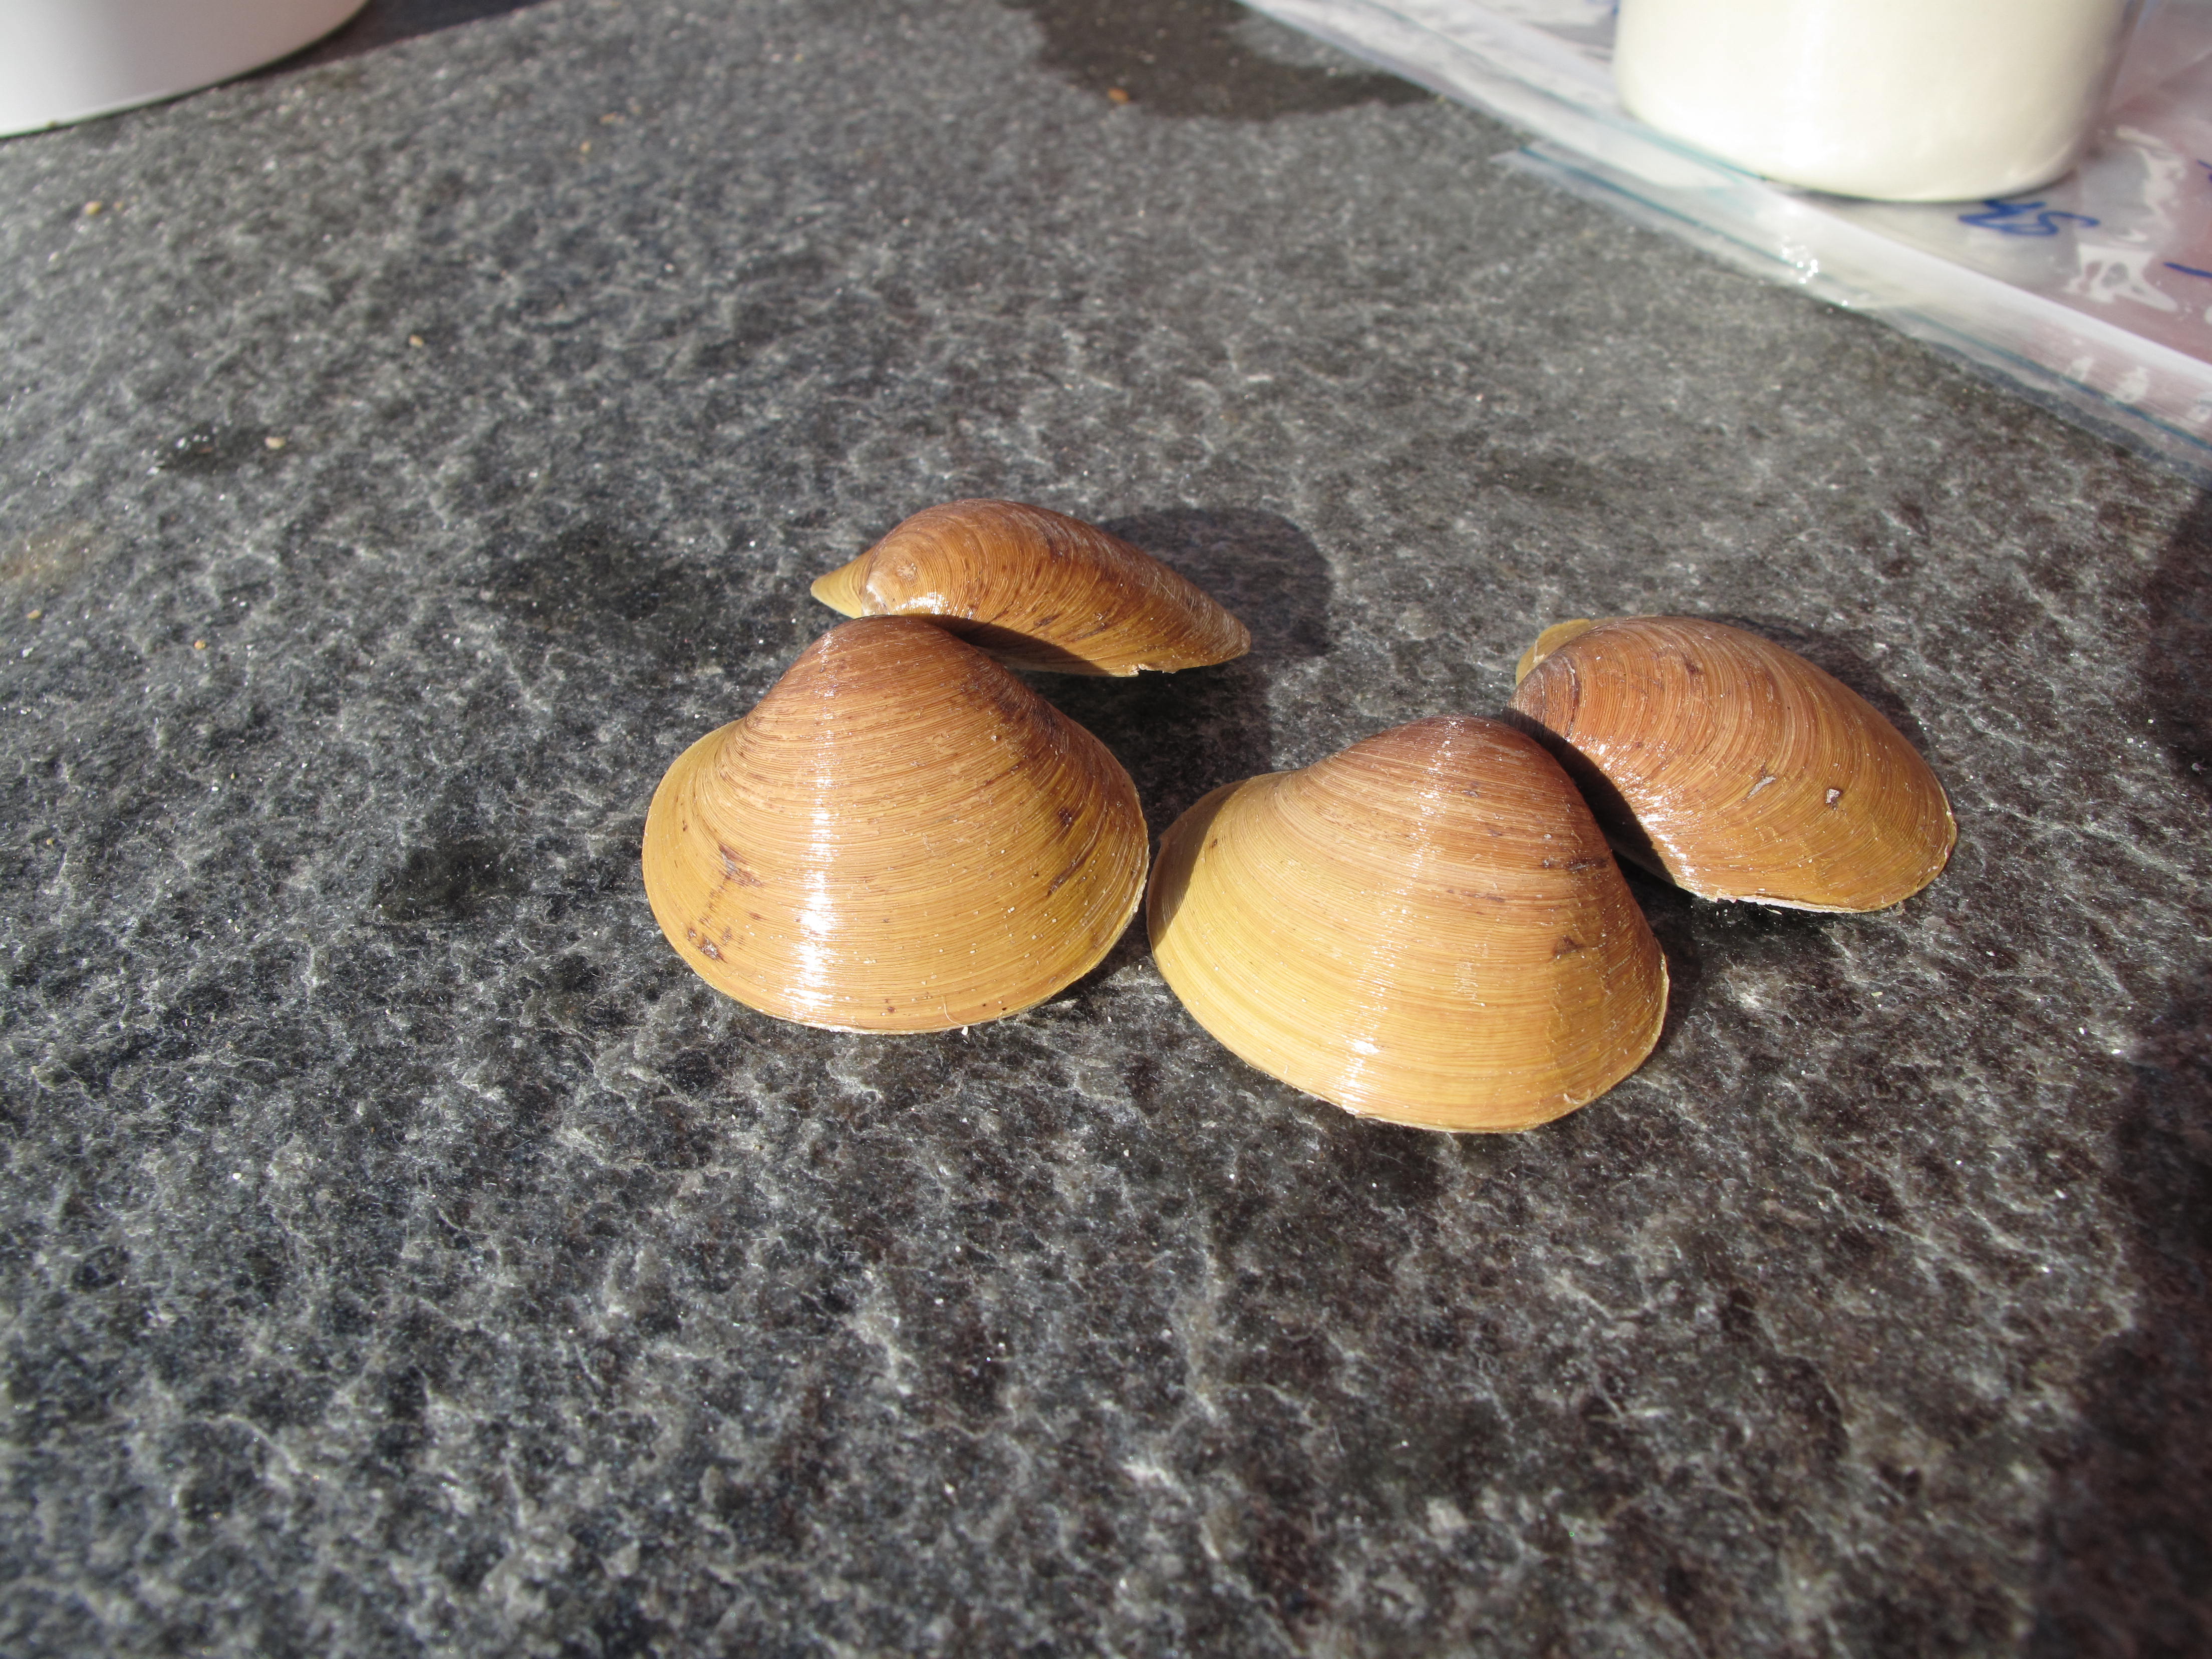 Two little clams from deepwater